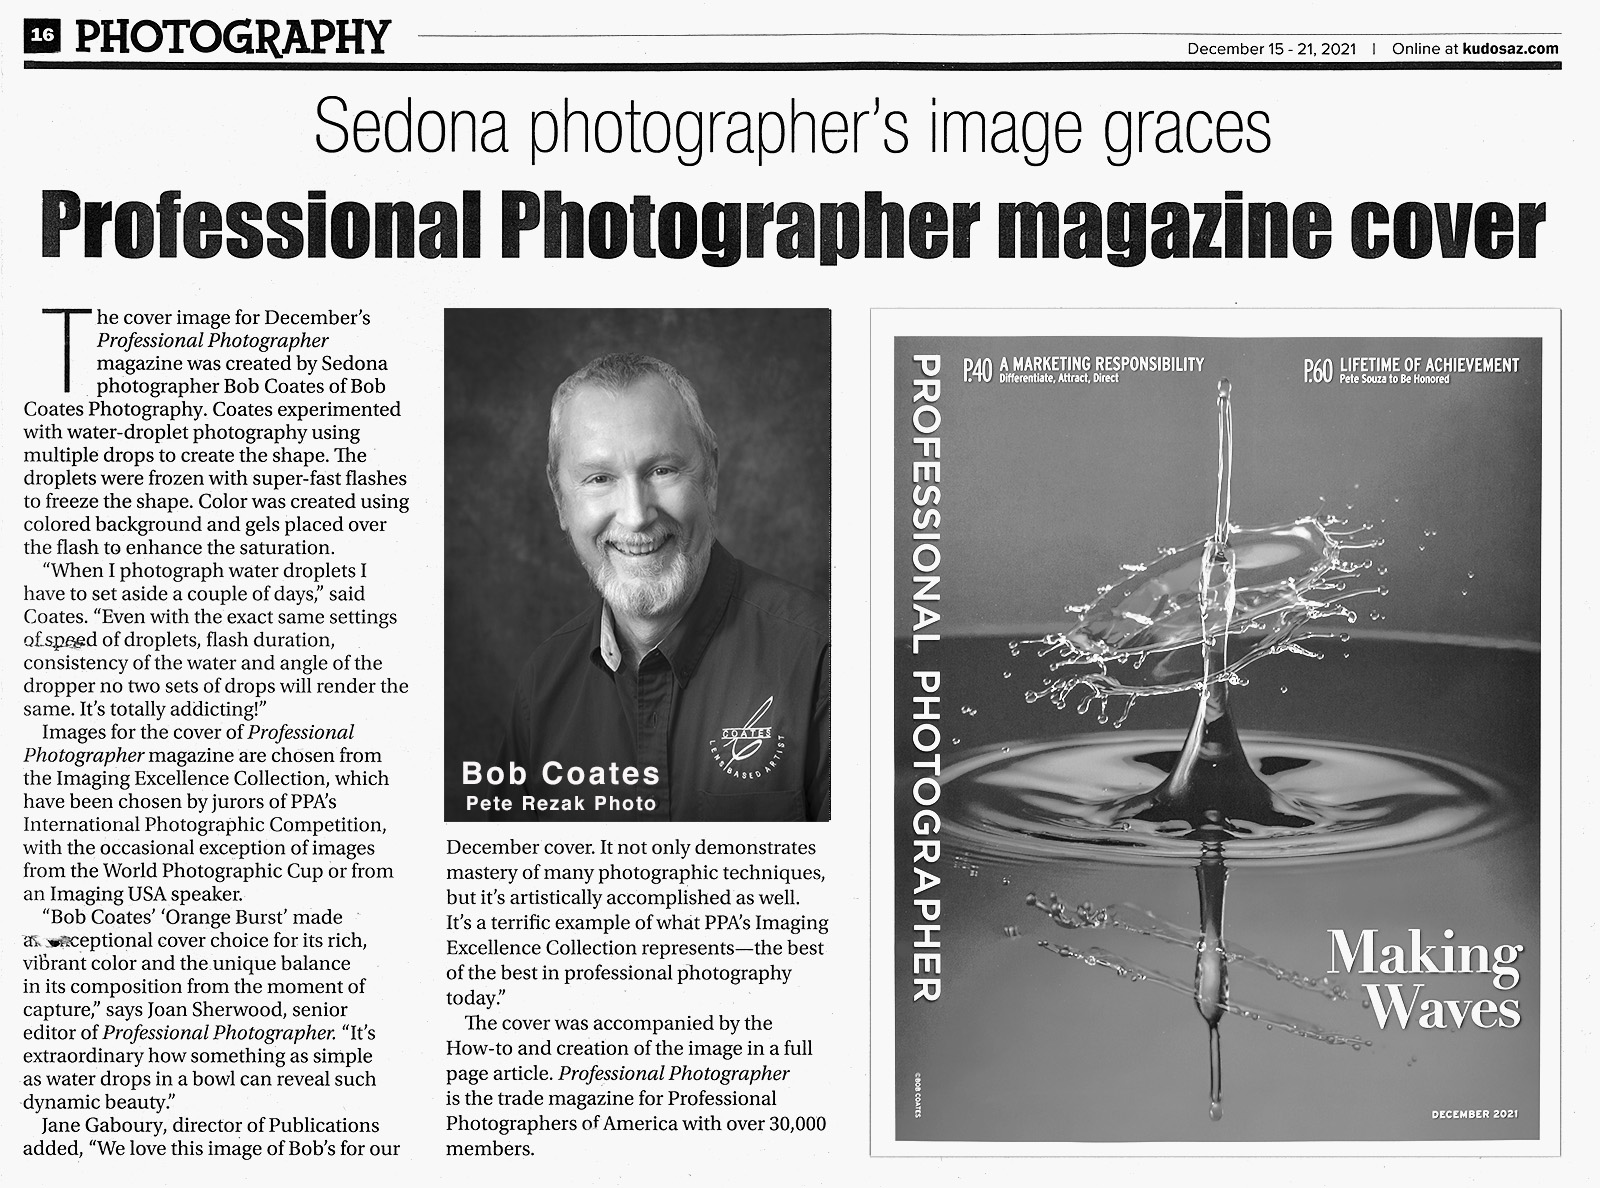 PPA cover article with image by bob coates photography